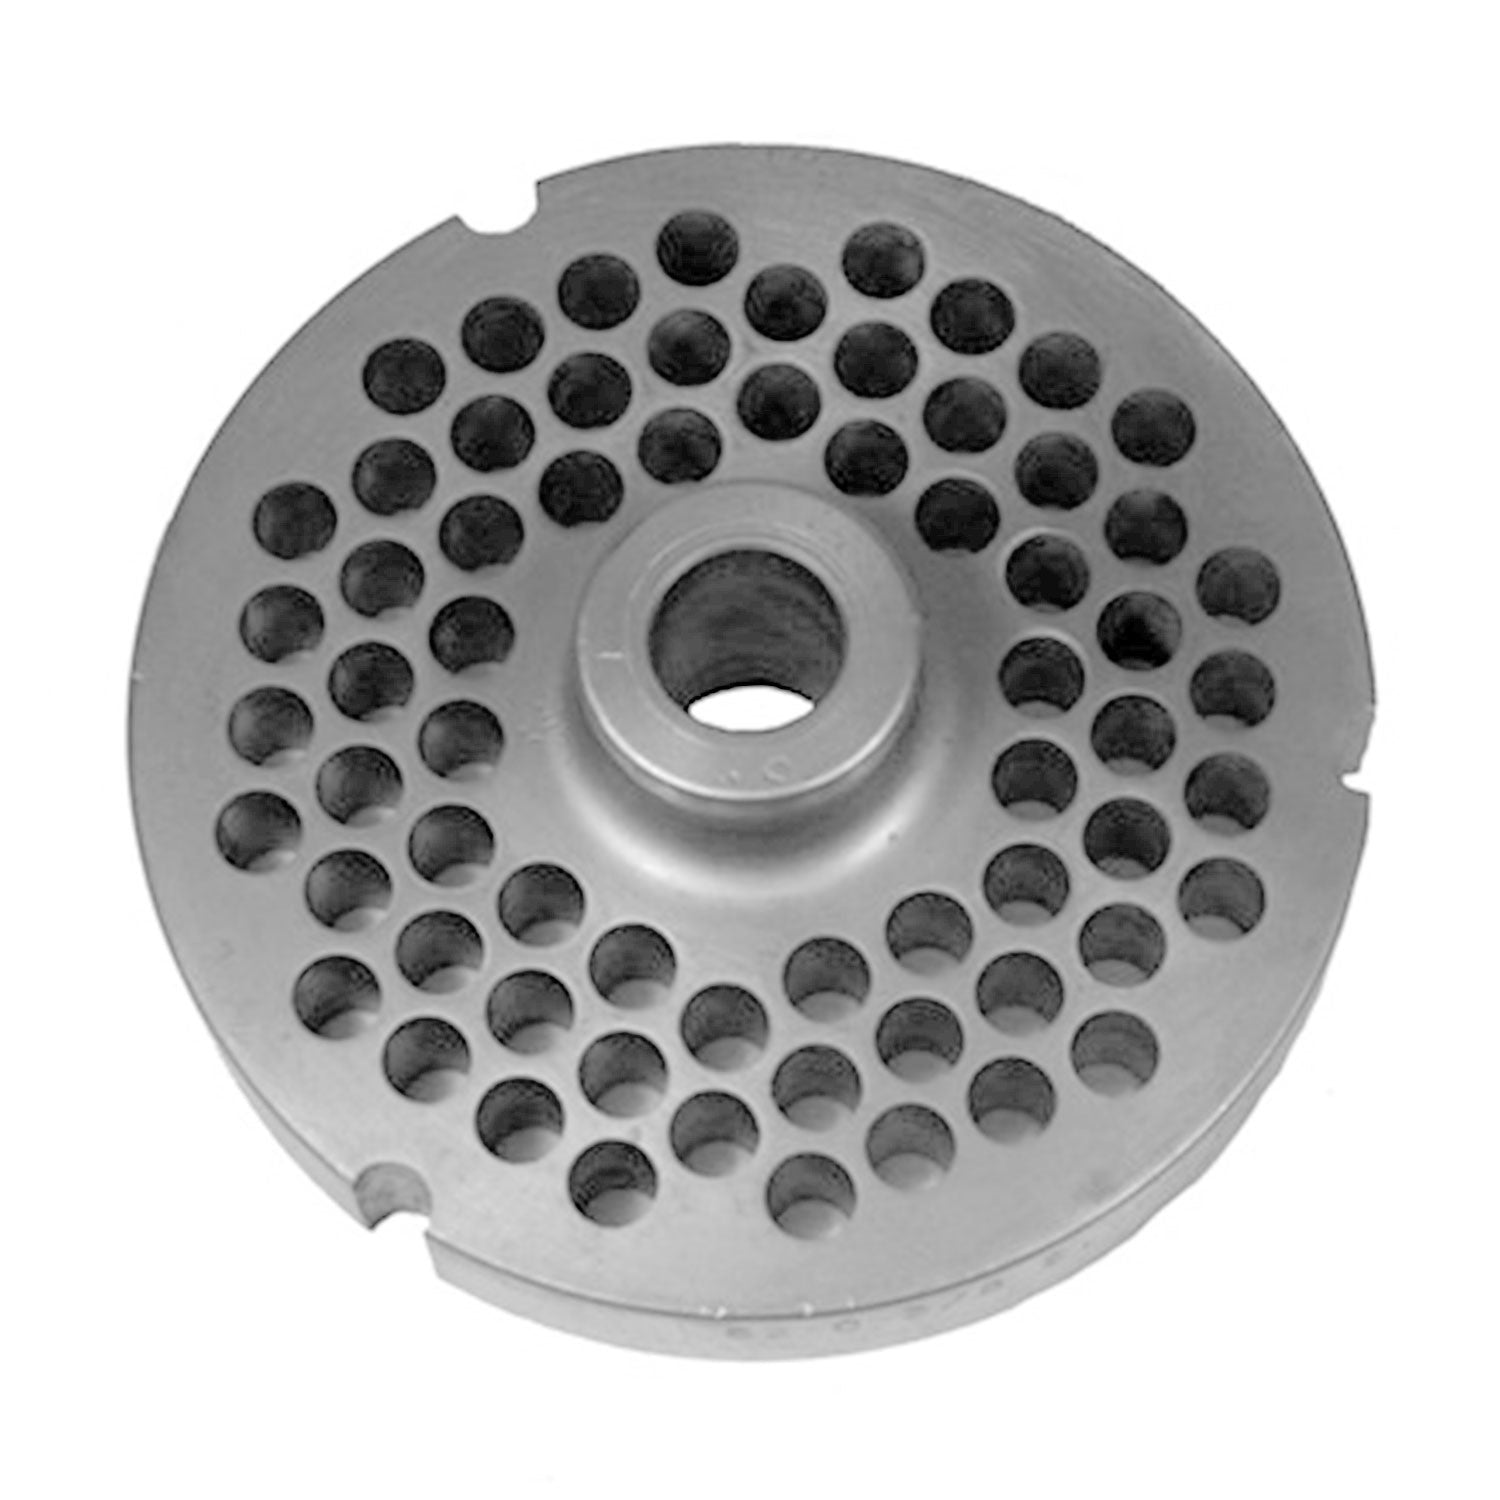 Size 52 PM Hubbed Meat Grinder Plate, 3/8